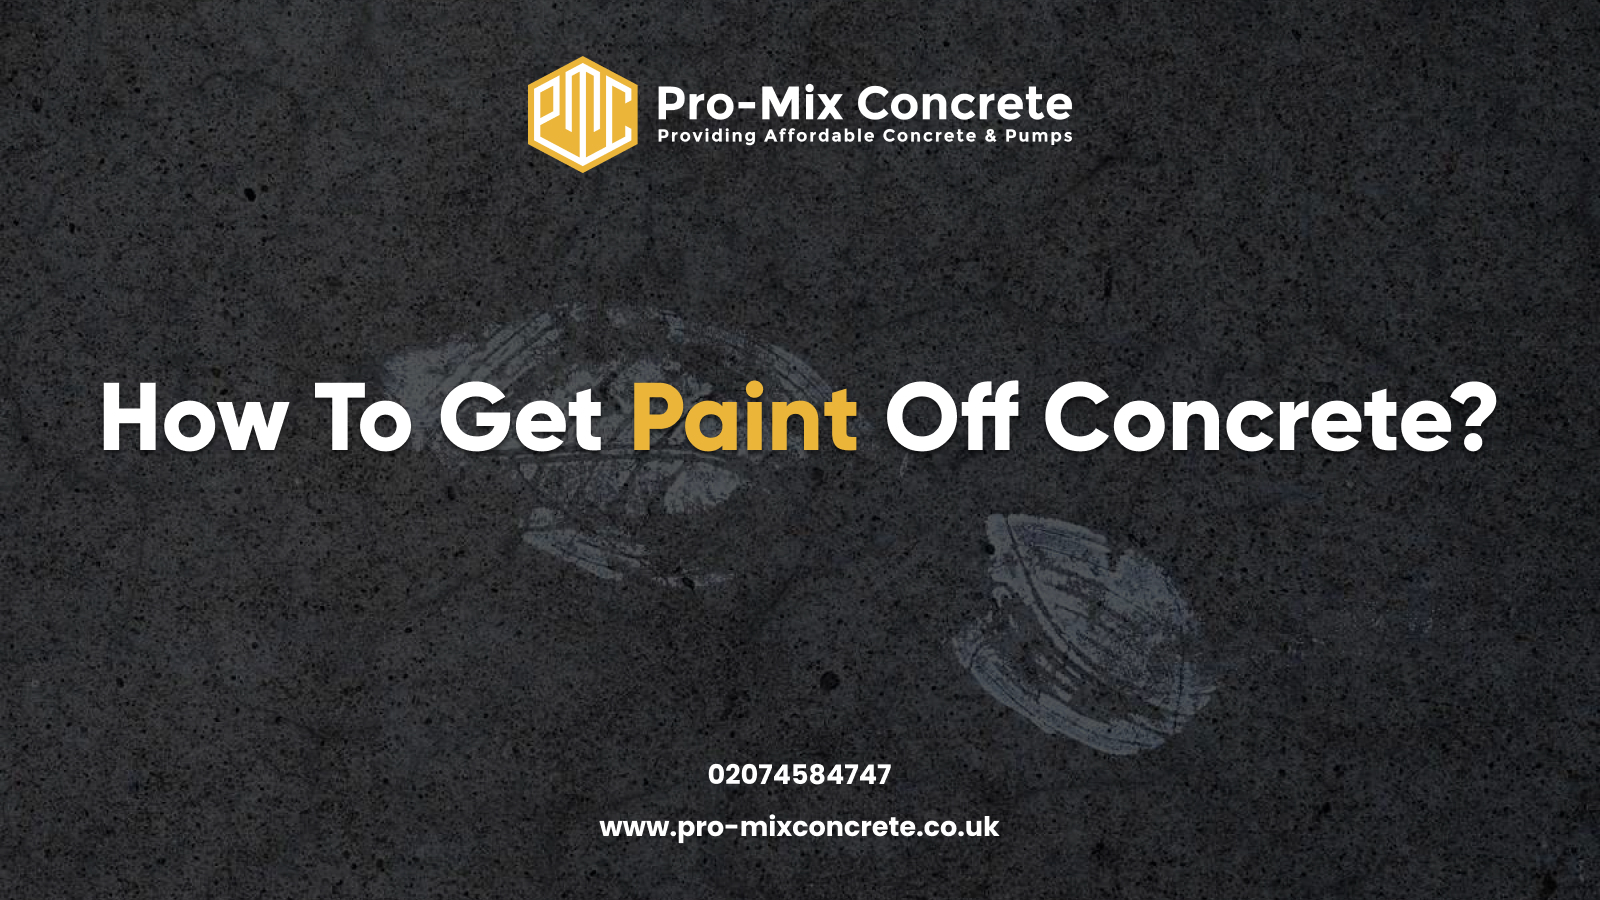 How To Get Paint Off Concrete?